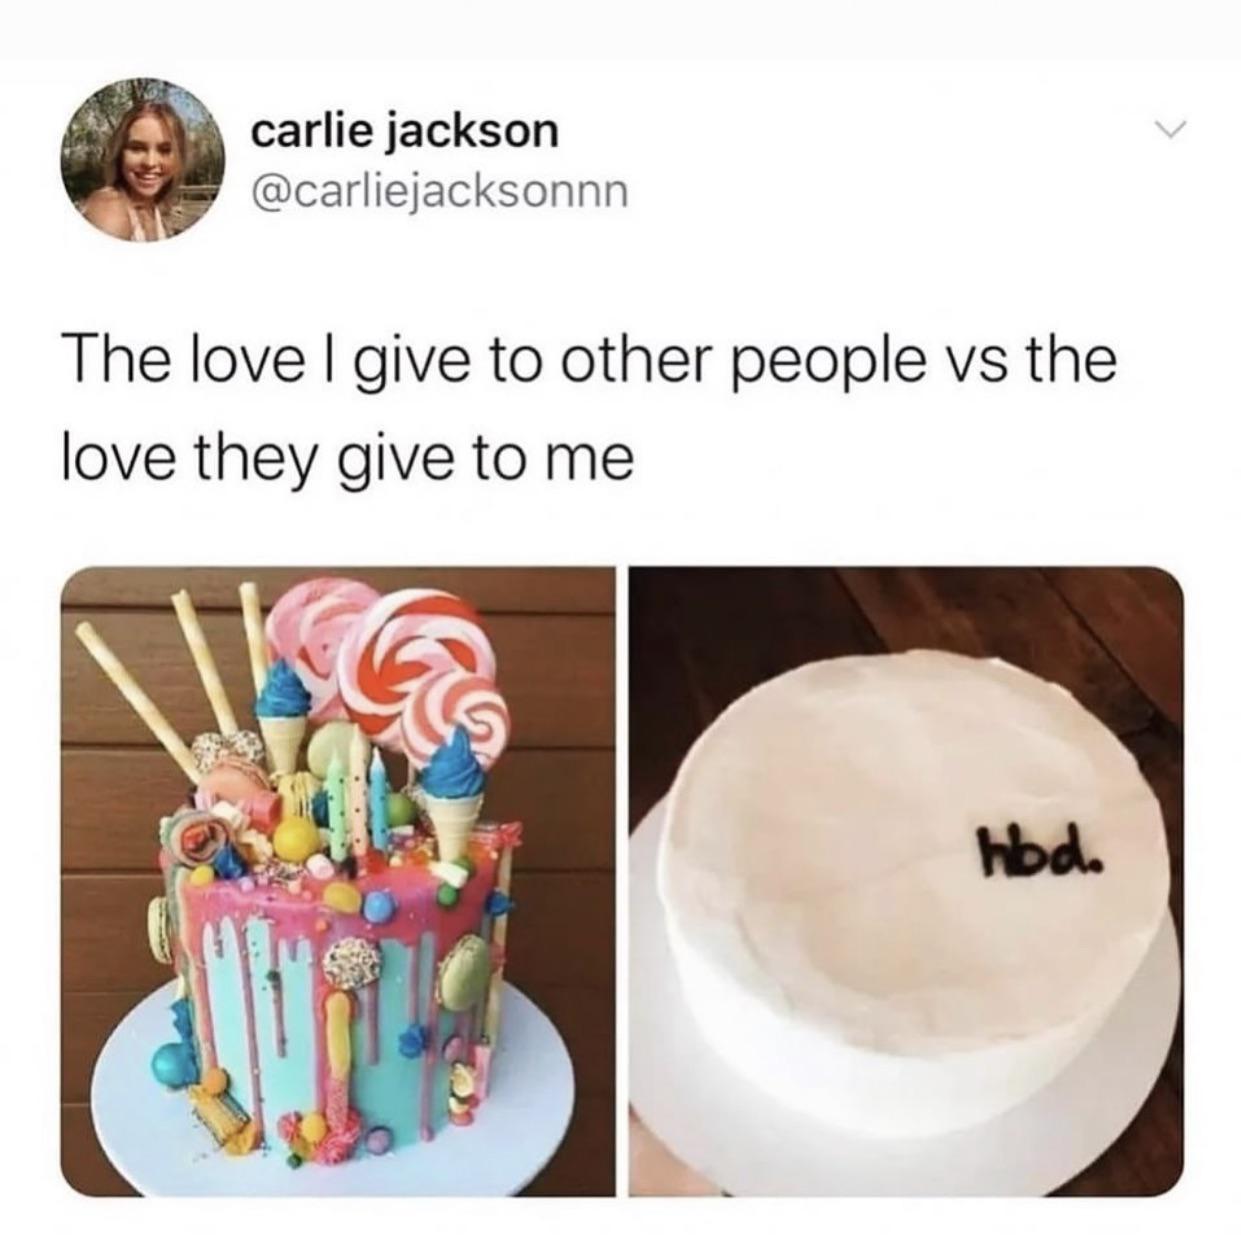 memes reddit twitter - others birthday vs my birthday meme - carlie jackson The love I give to other people vs the love they give to me 11 hbd.